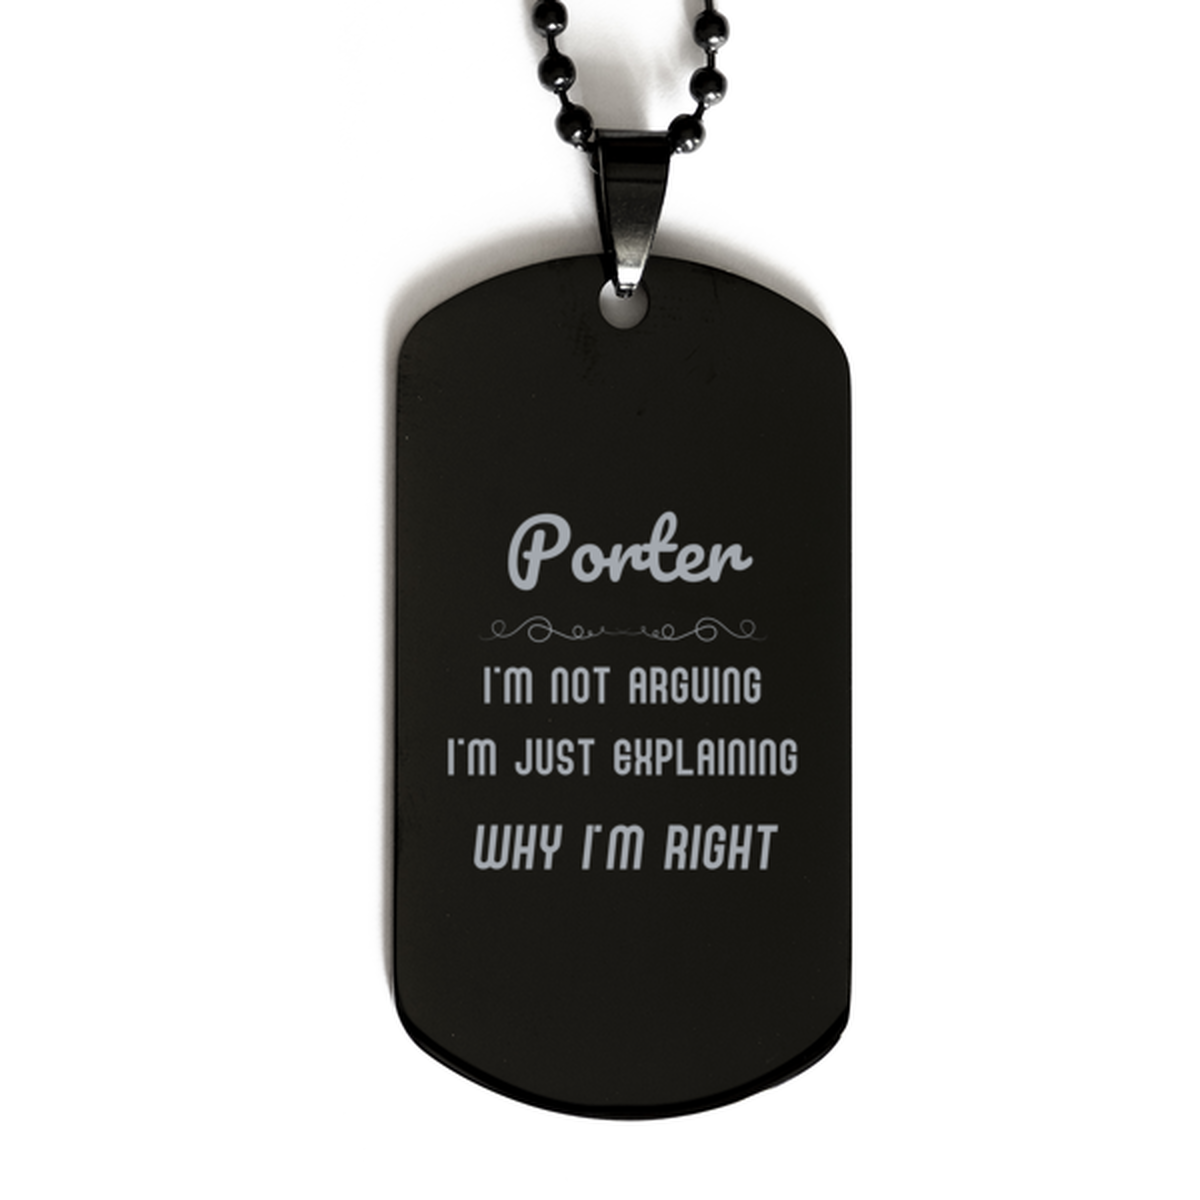 Porter I'm not Arguing. I'm Just Explaining Why I'm RIGHT Black Dog Tag, Funny Saying Quote Porter Gifts For Porter Graduation Birthday Christmas Gifts for Men Women Coworker